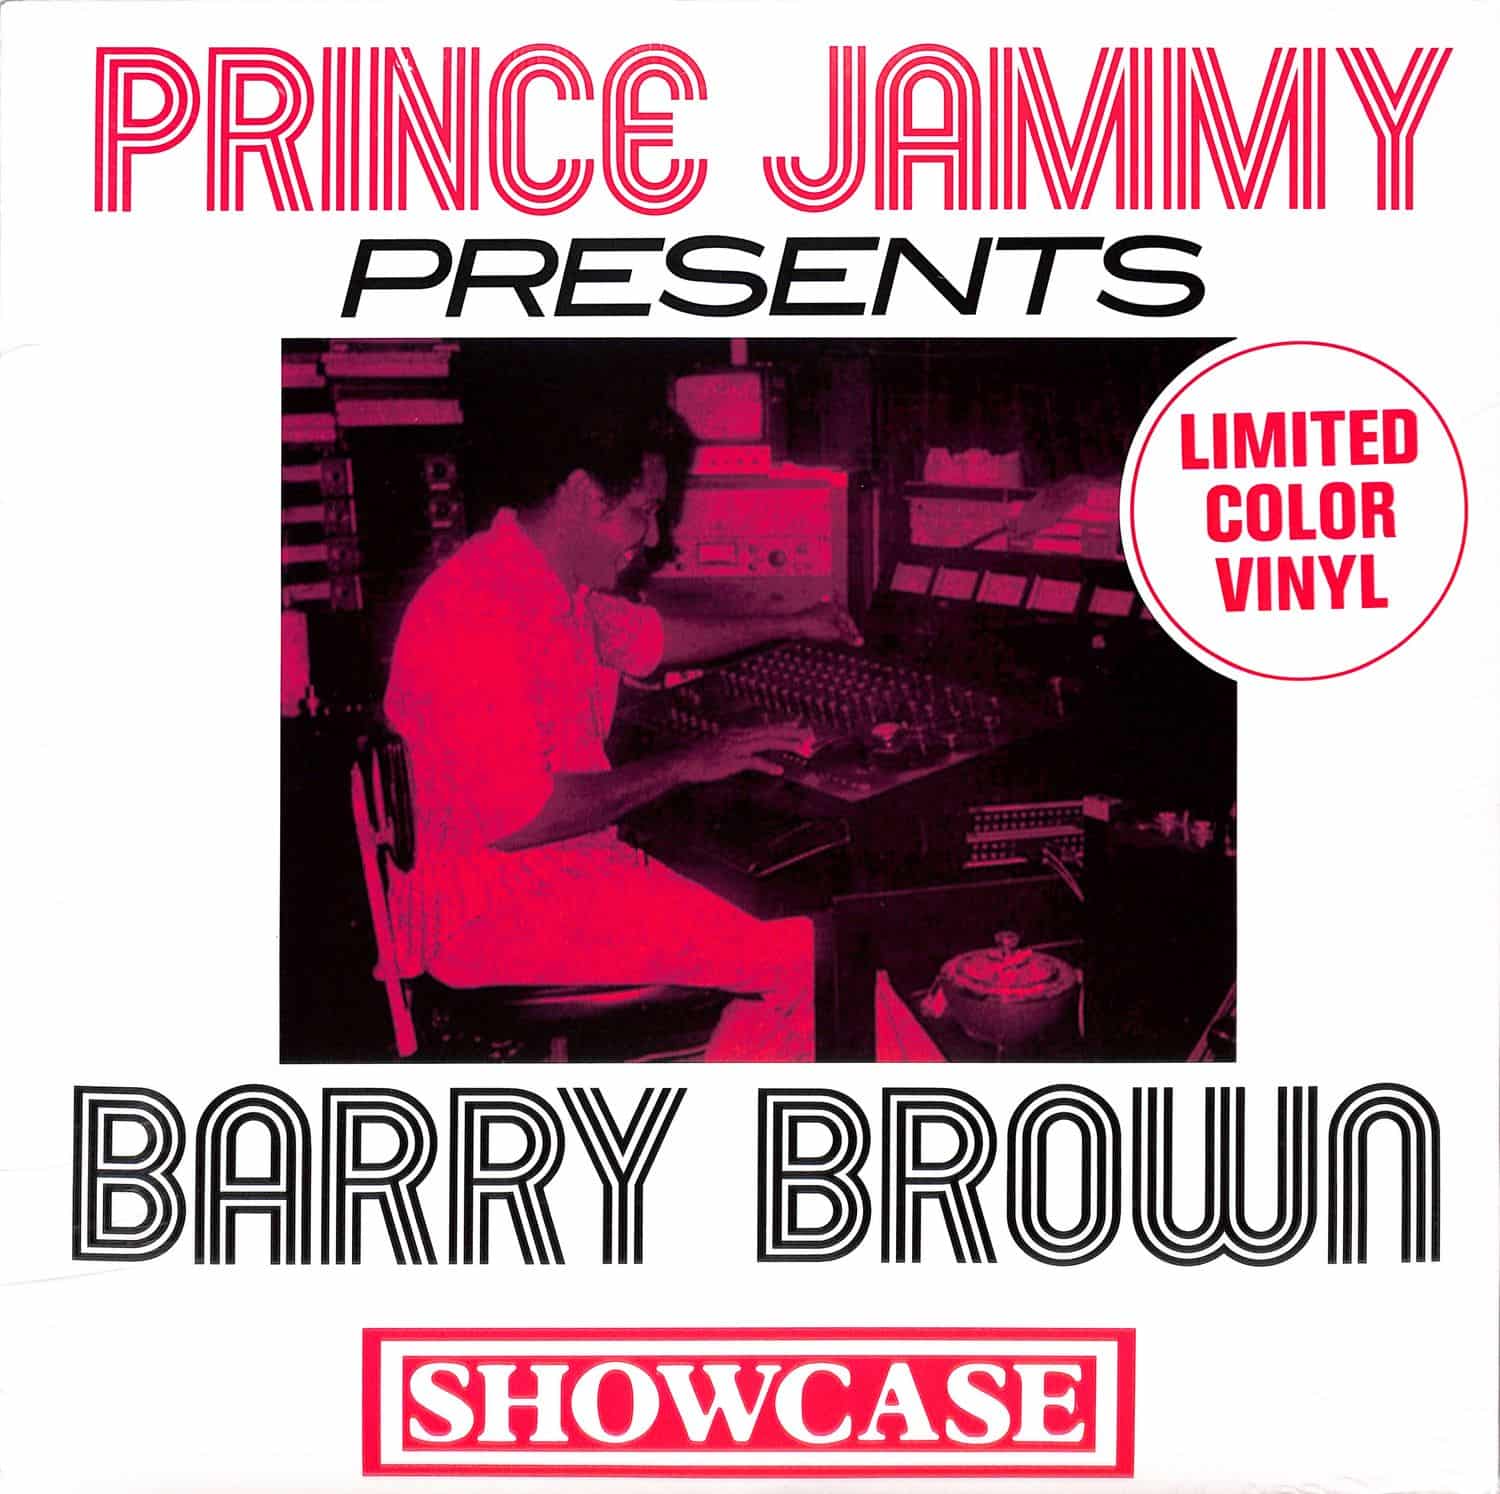 Prince Jammy Presents Barry Brown - SHOWCASE 